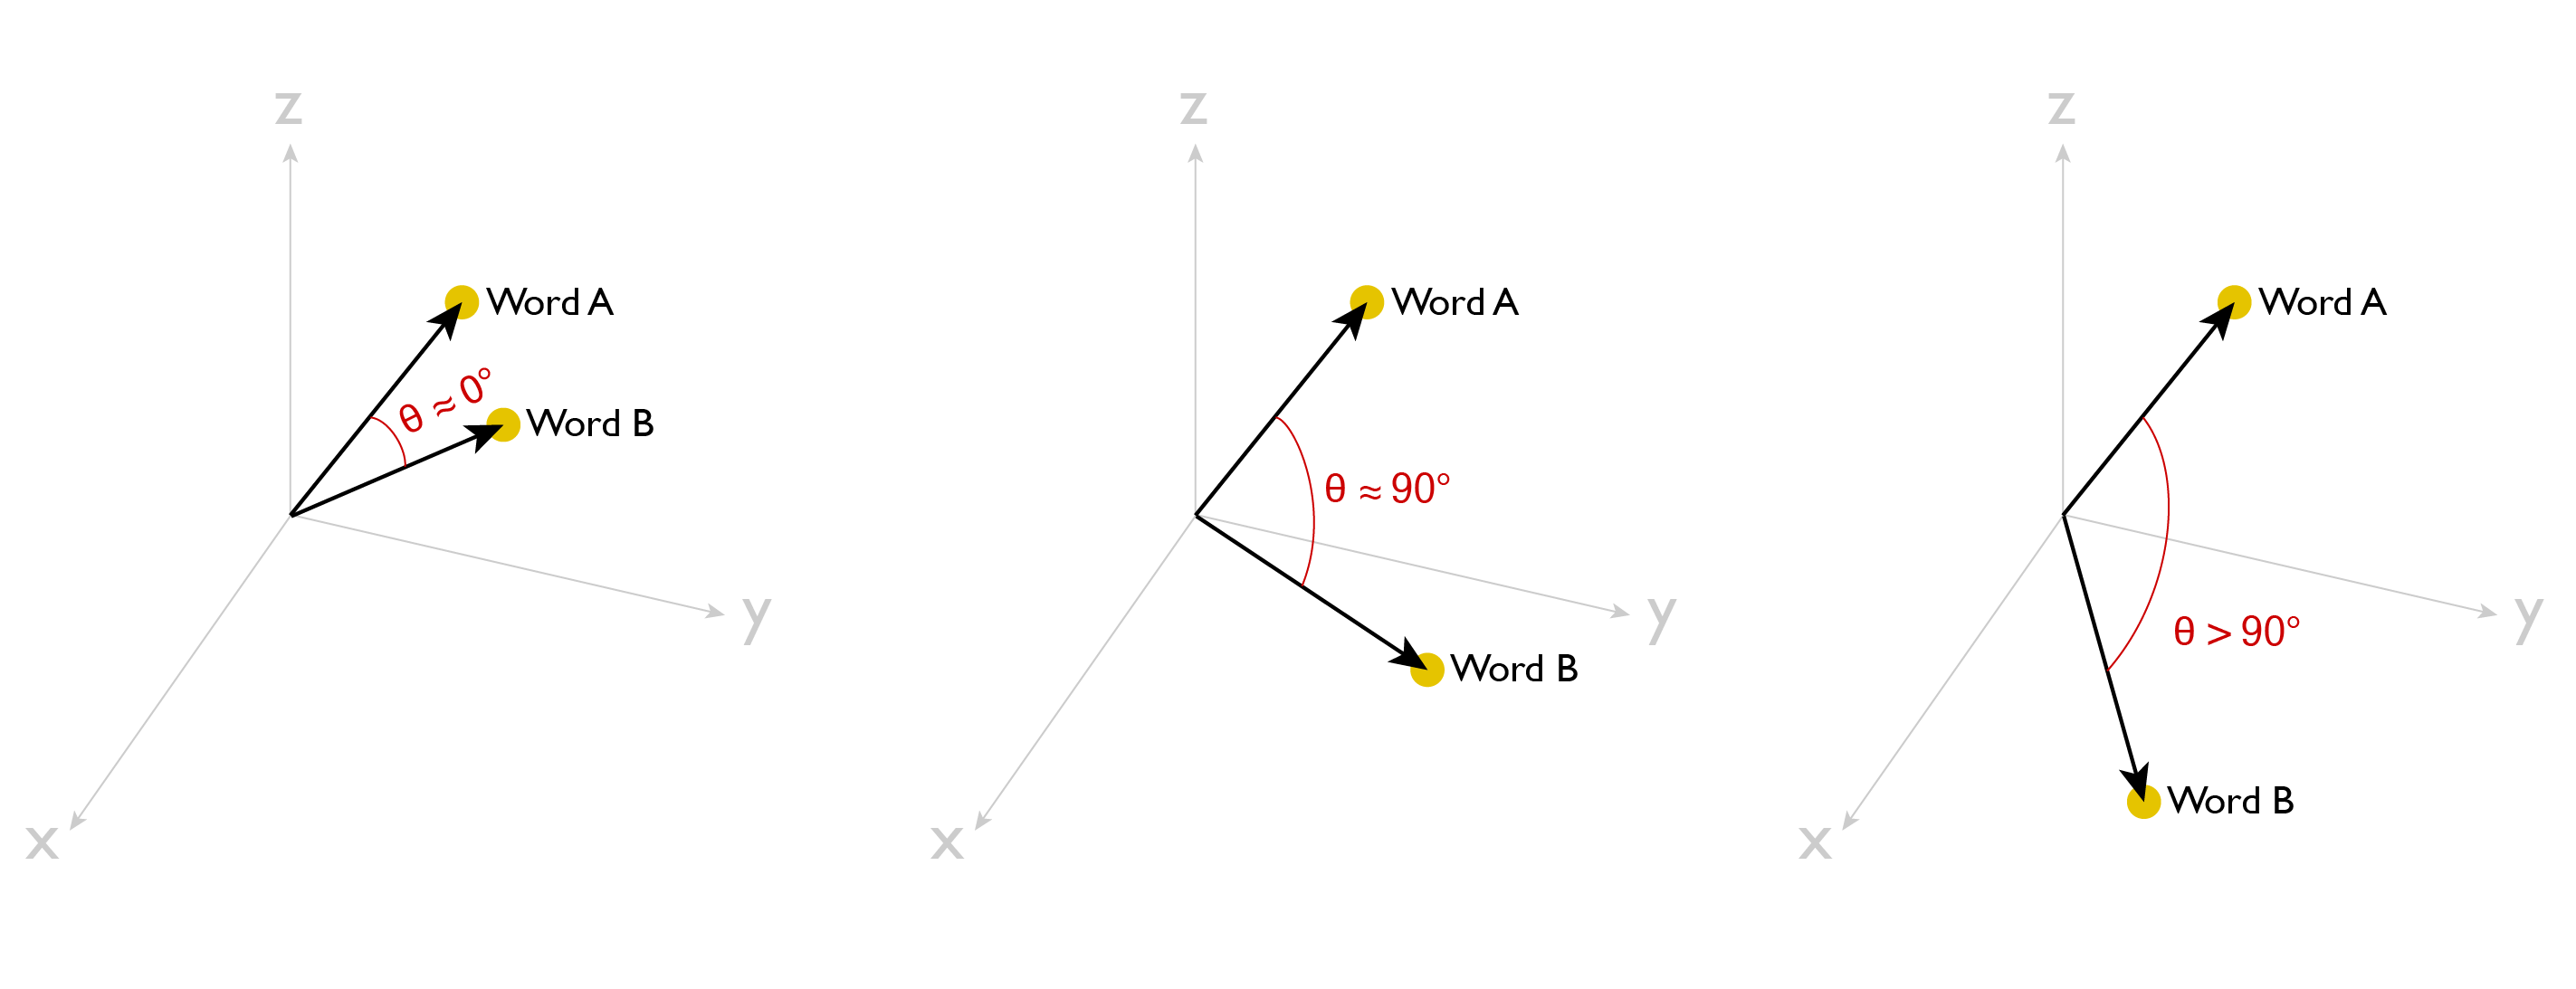 Graphic illustrating how cosine similarity, computed via the angle between two vectors in word vector space, is used to measure relative semantic similarity or dissimilarity between two words